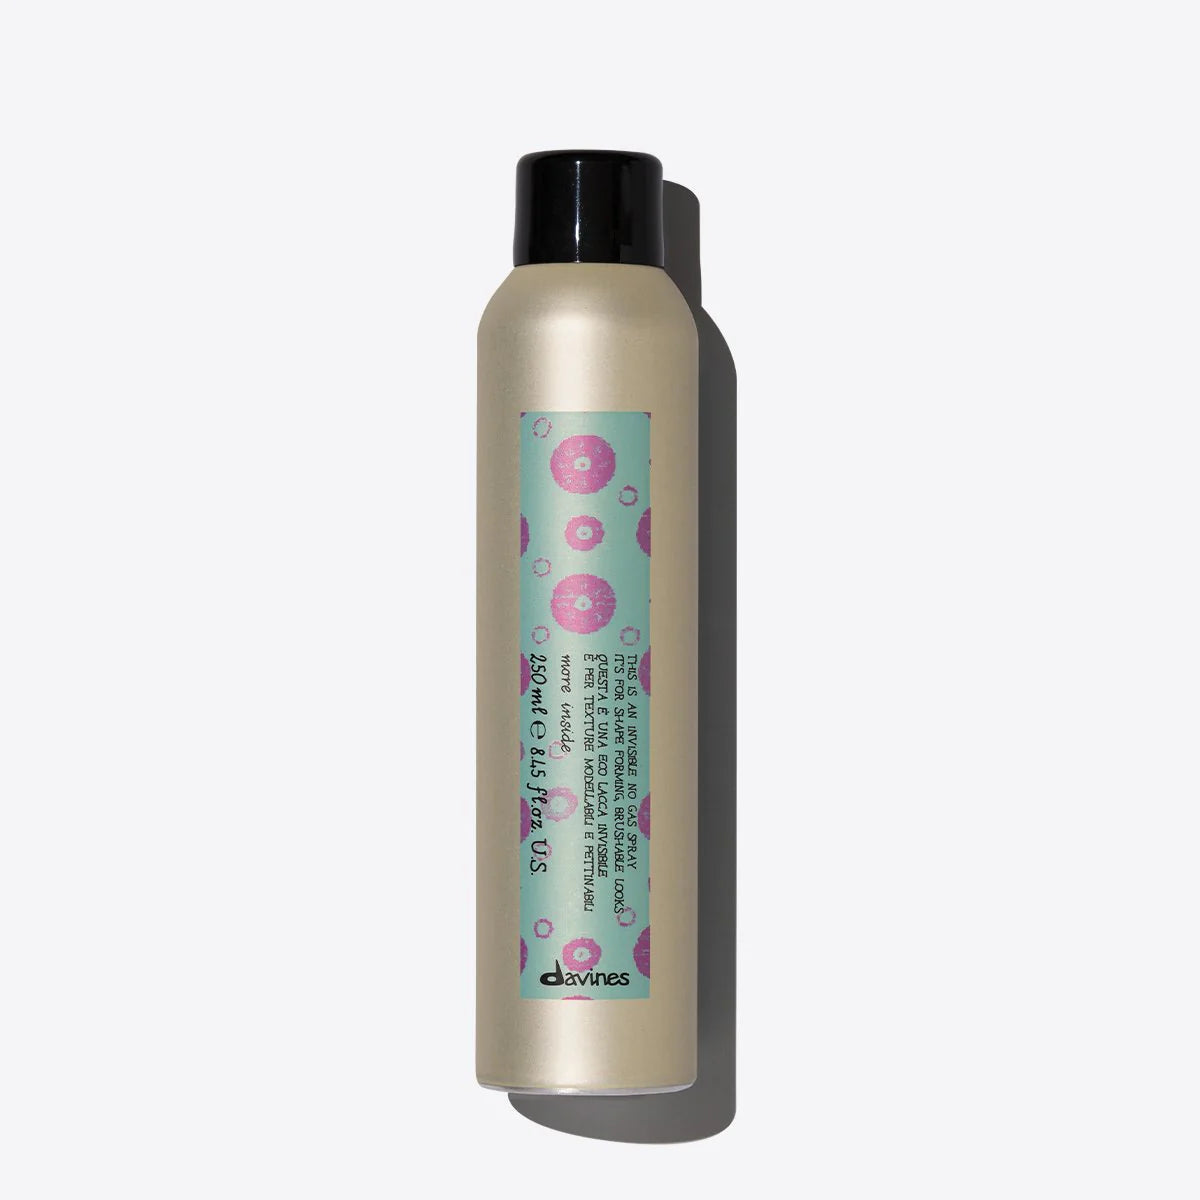 Davines This Is An Invisible No Gas Spray - Brushable hairspray for a natural look - [Kharma Salons]